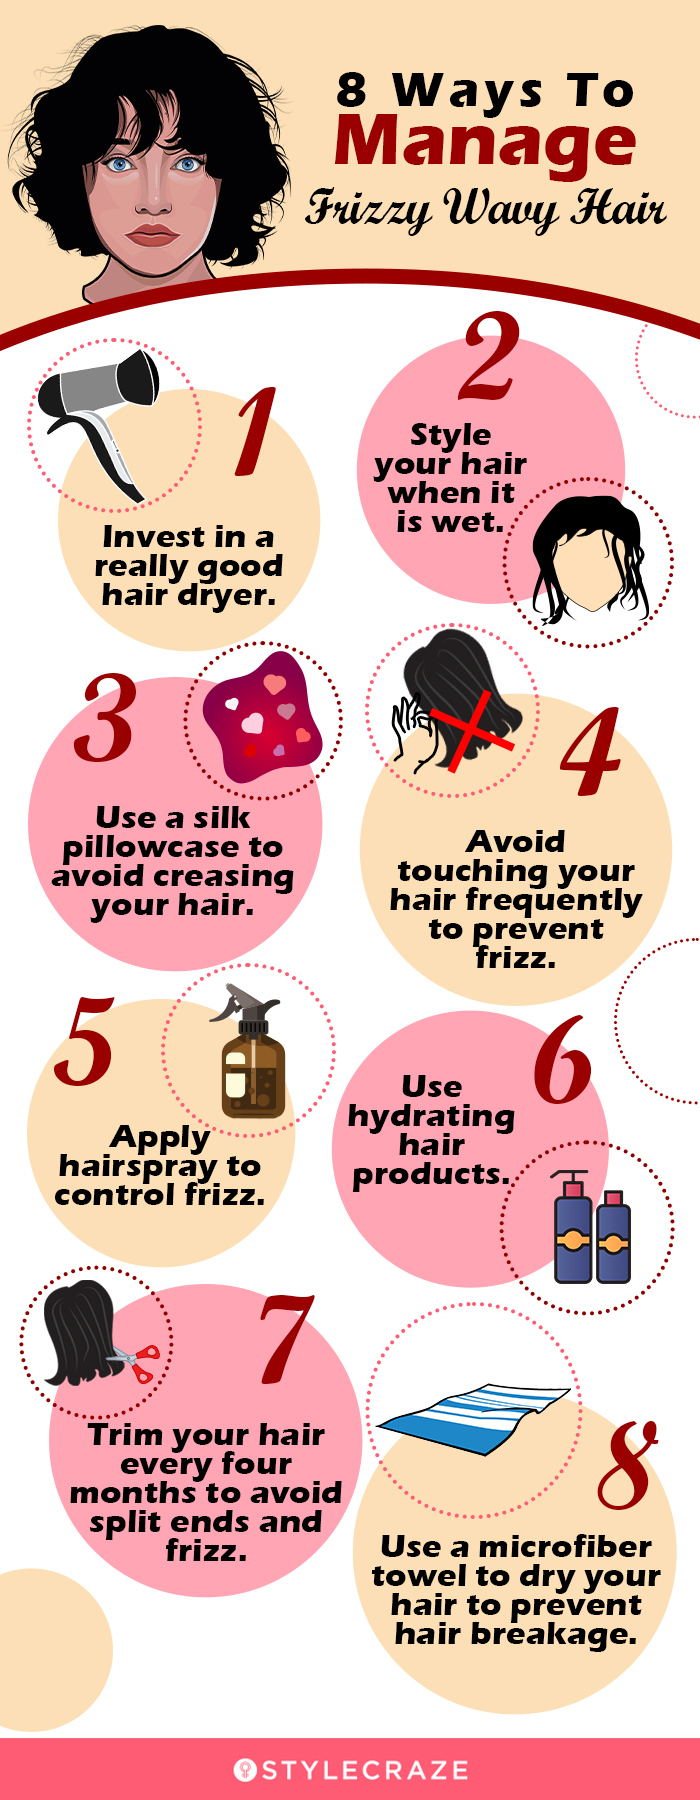 8 ways to manage frizzy wavy hair [infographic]